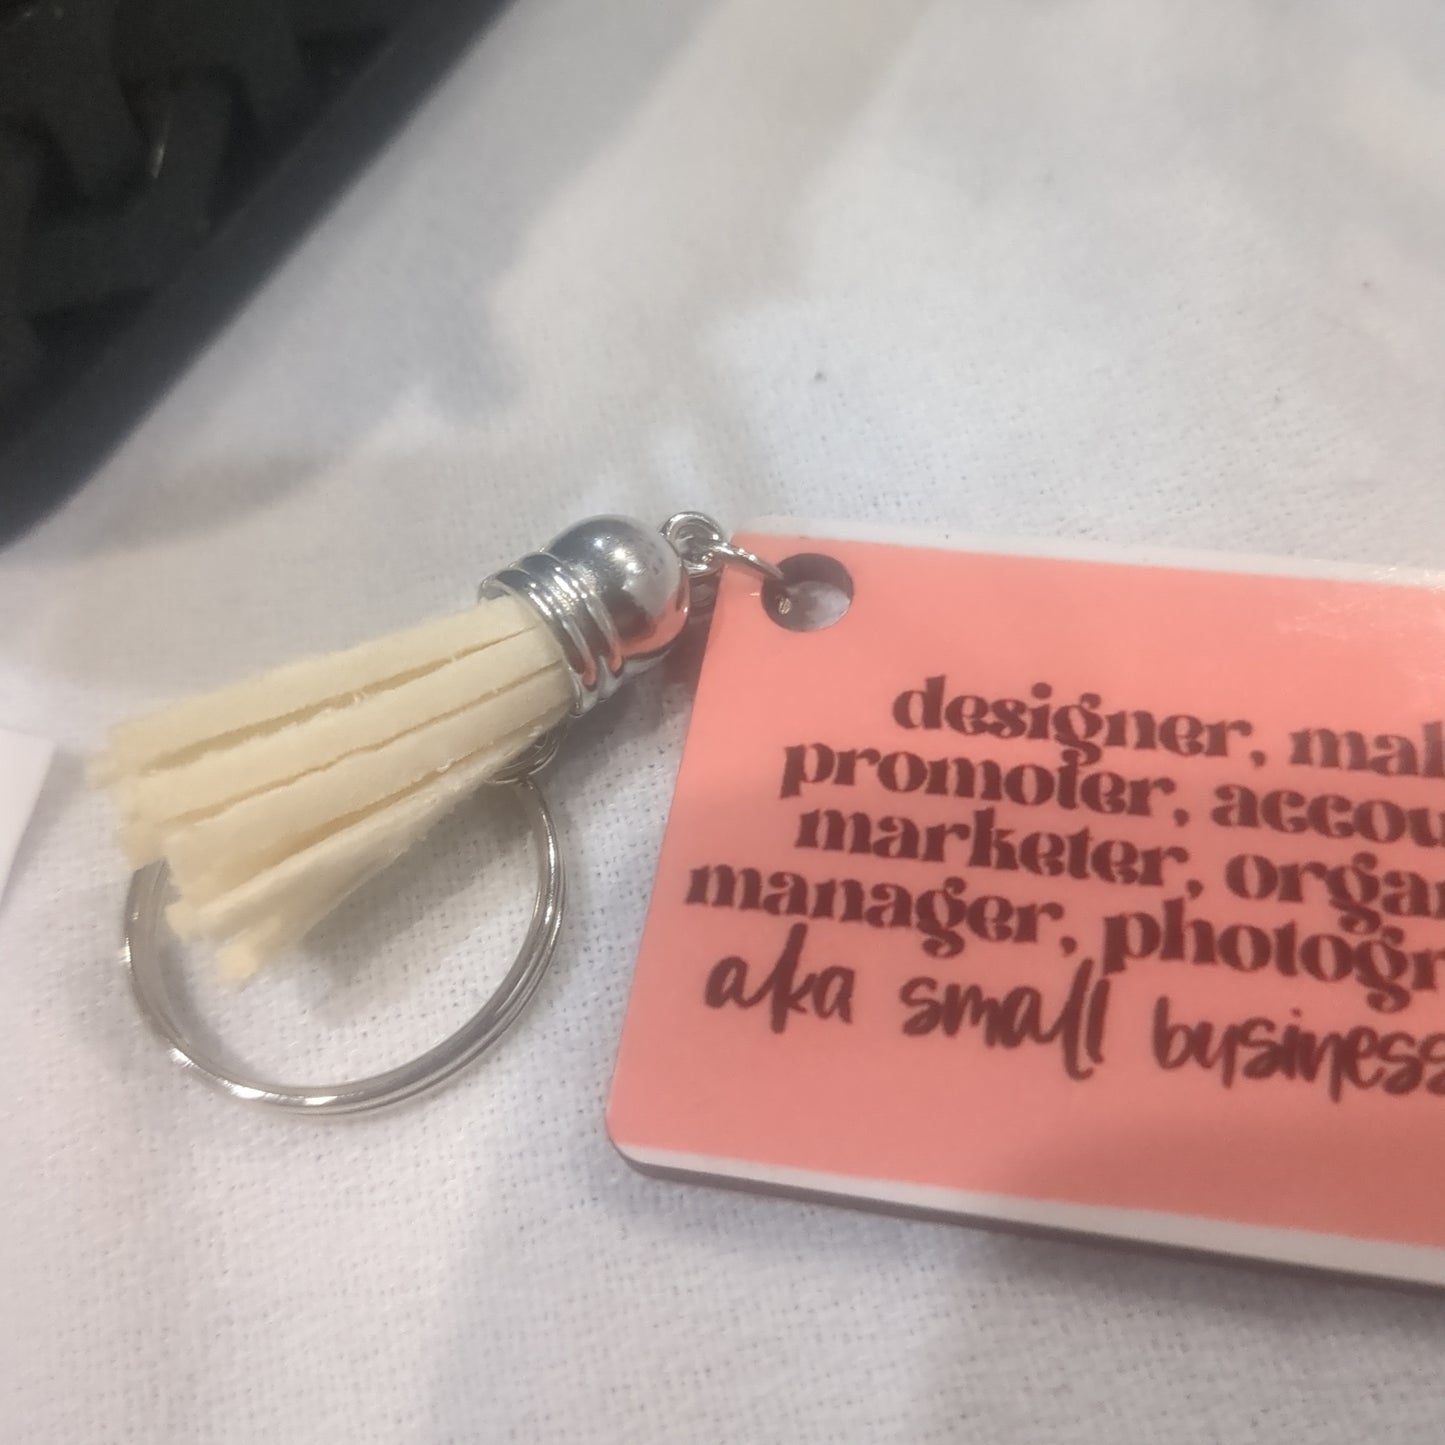 Keychain Small Business Owner